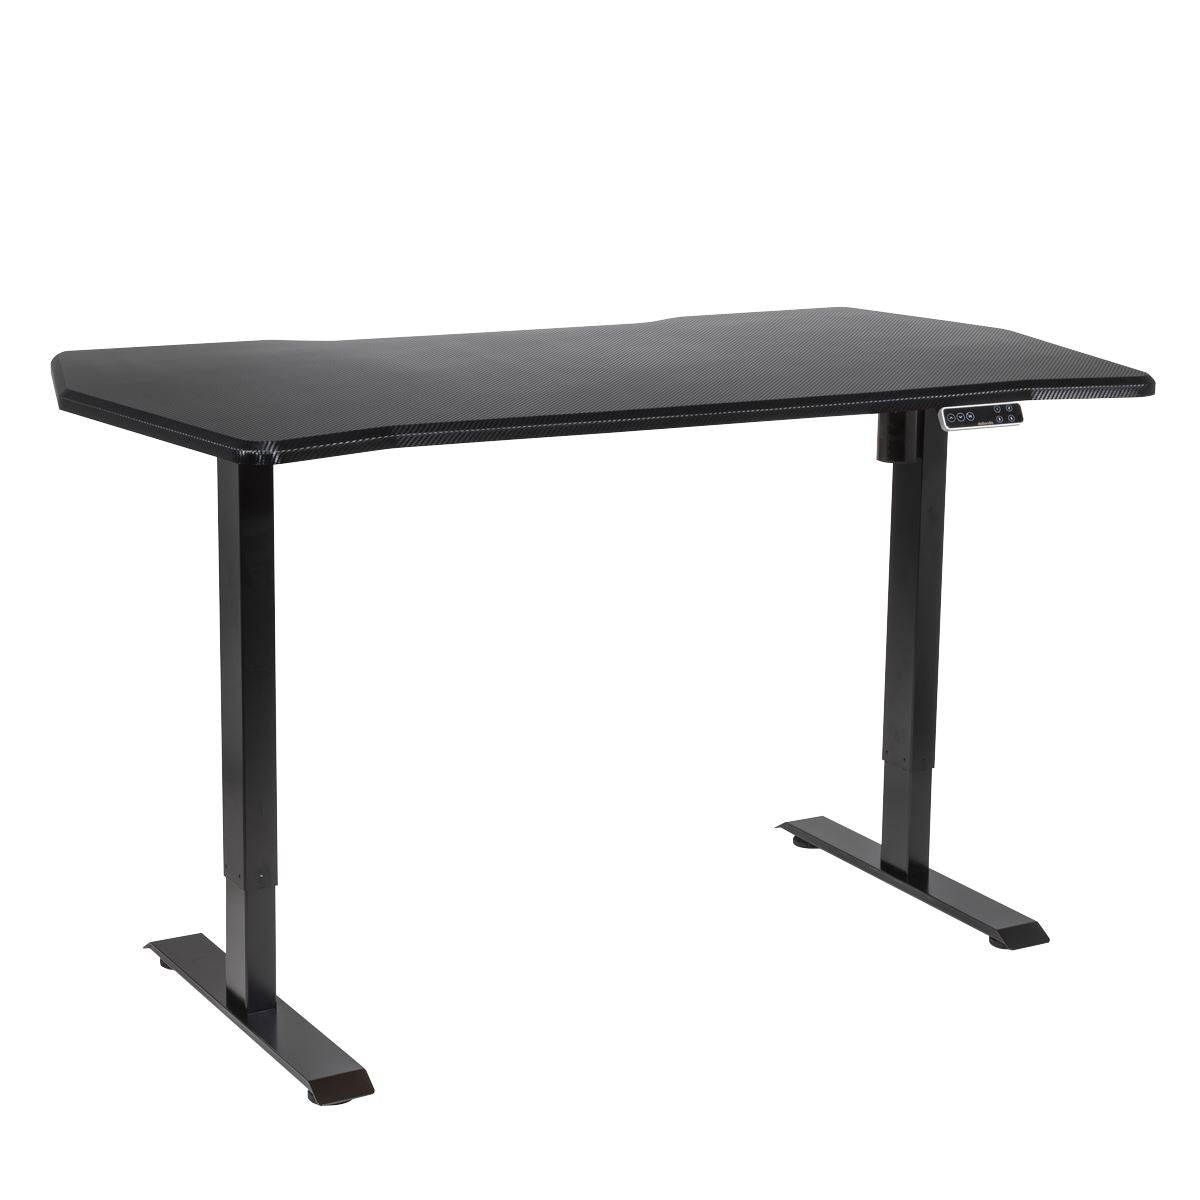 Dellonda Carbon Electric Height Adjustable Standing Desk with Memory, Quiet, 1400 x 700mm